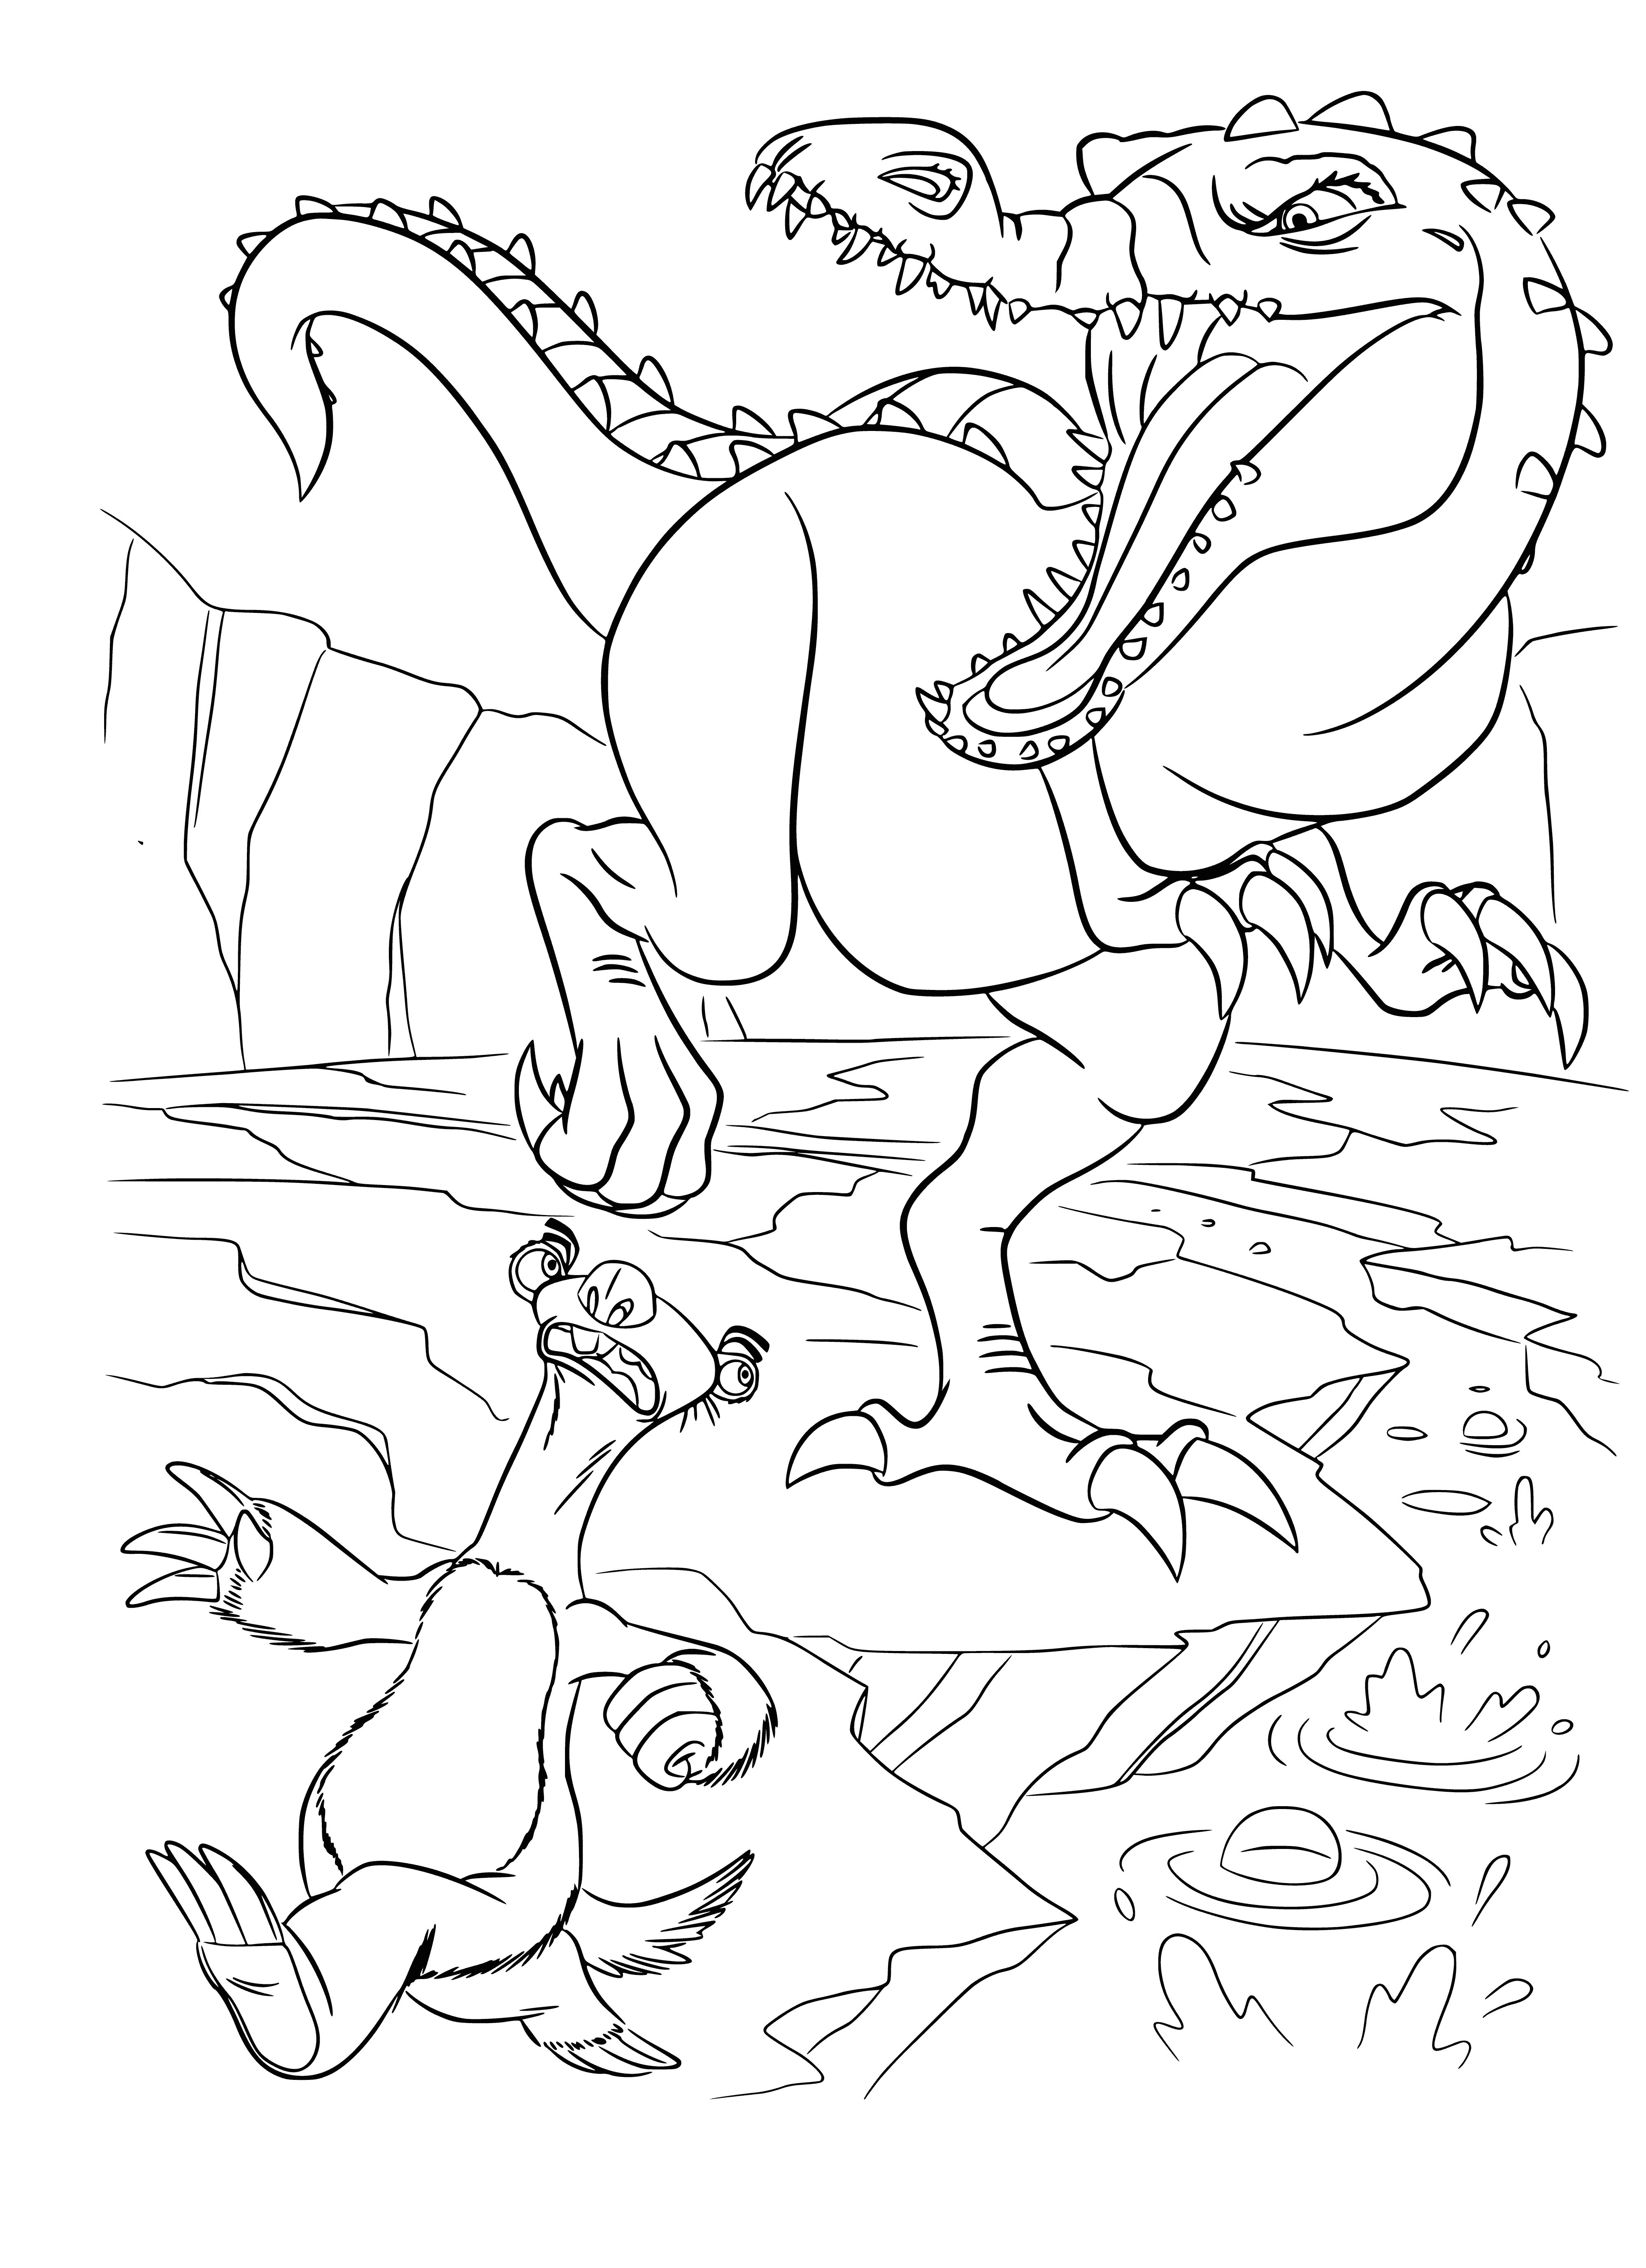 coloring page: Cartoon dinosaurs, T-Rex (purple, red eyes) and Triceratops (green, blue eyes), found perching on large blue and white icicle with open mouths and hanging tongue.